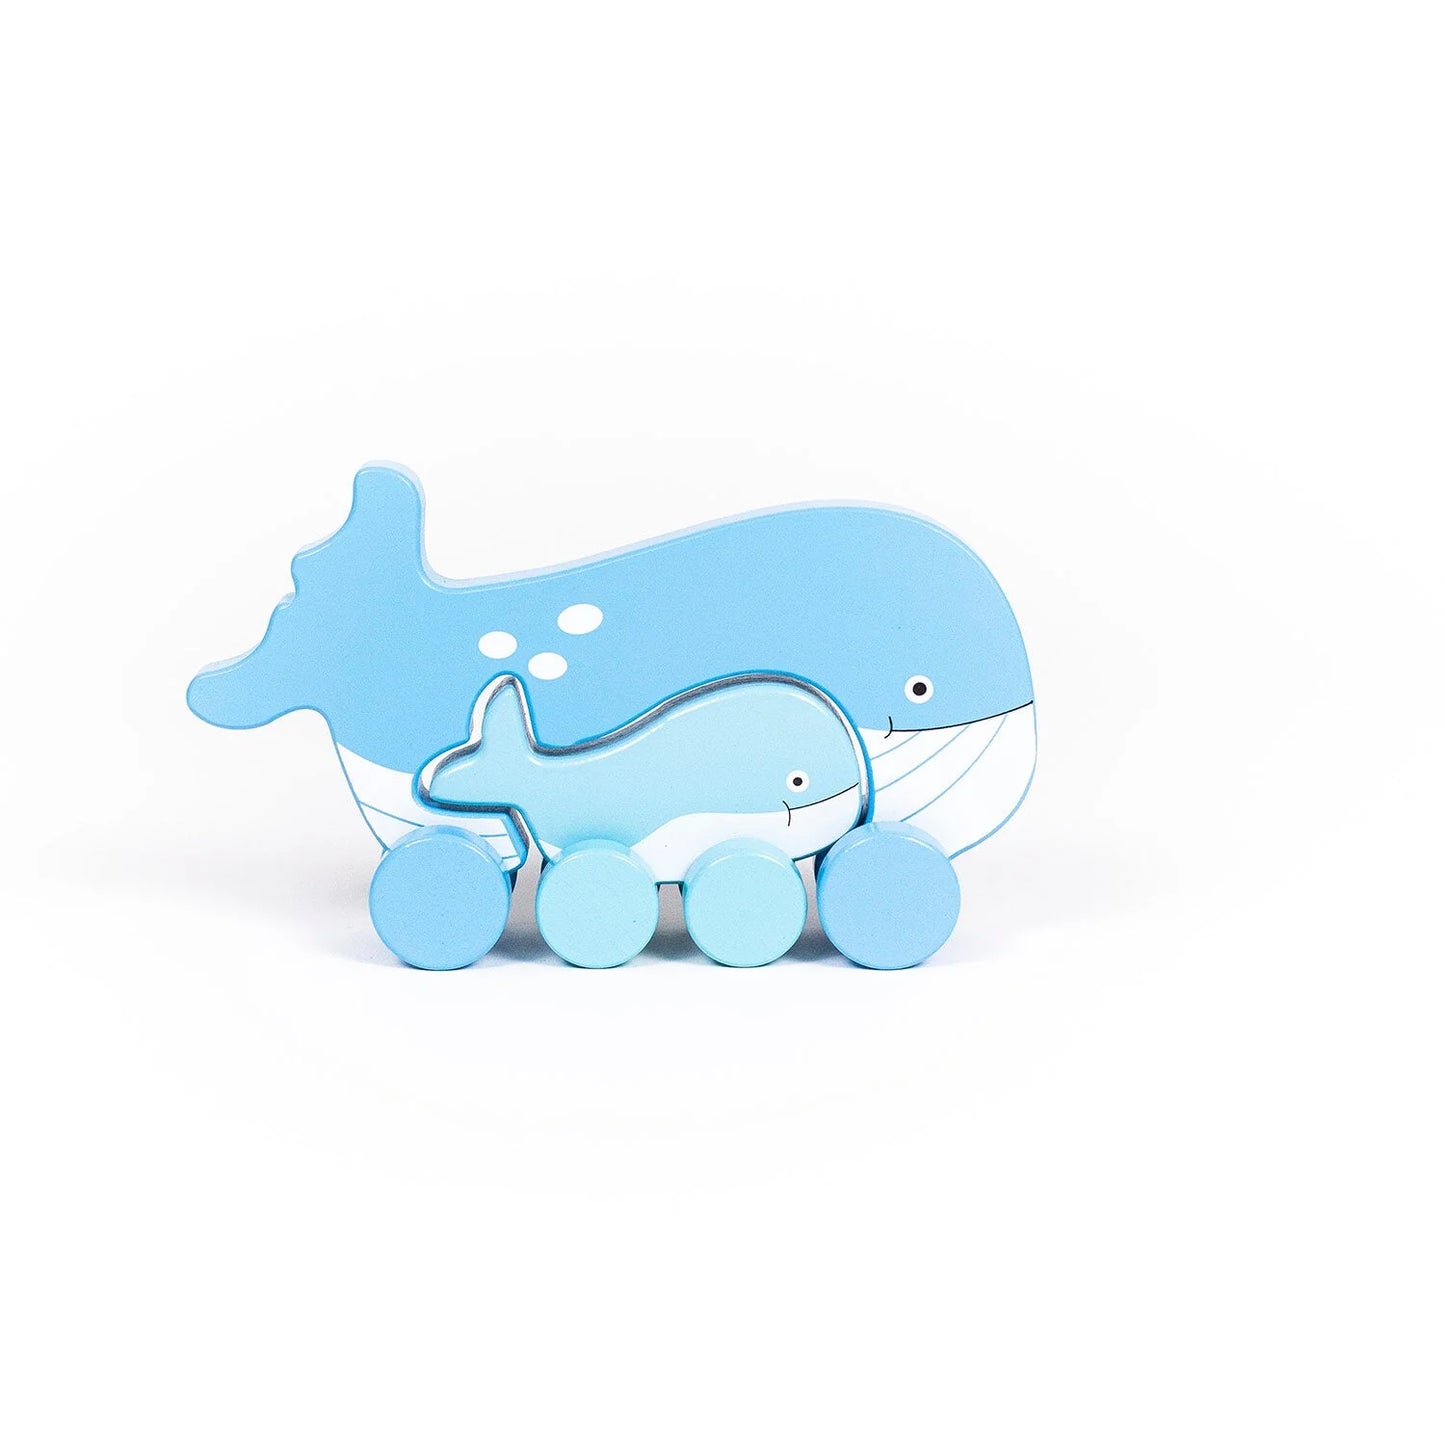 Big & Little Whale Push Toy